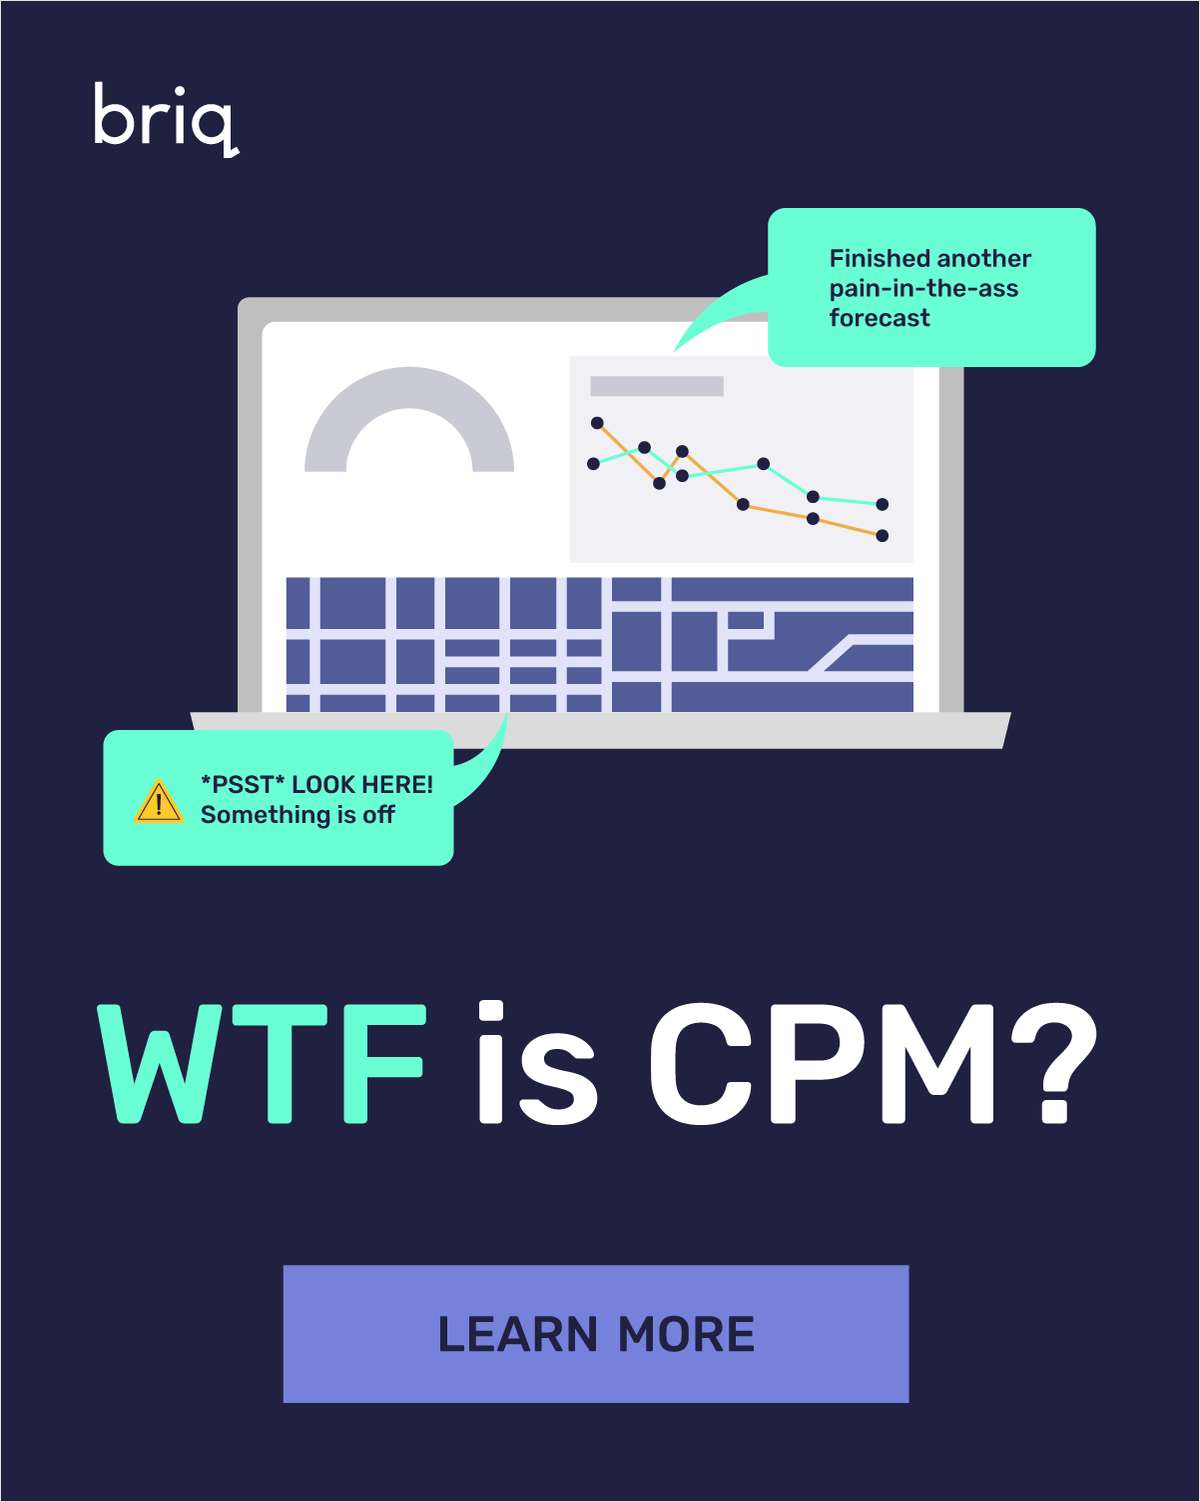 WTF is CPM for Construction Financial Professionals!